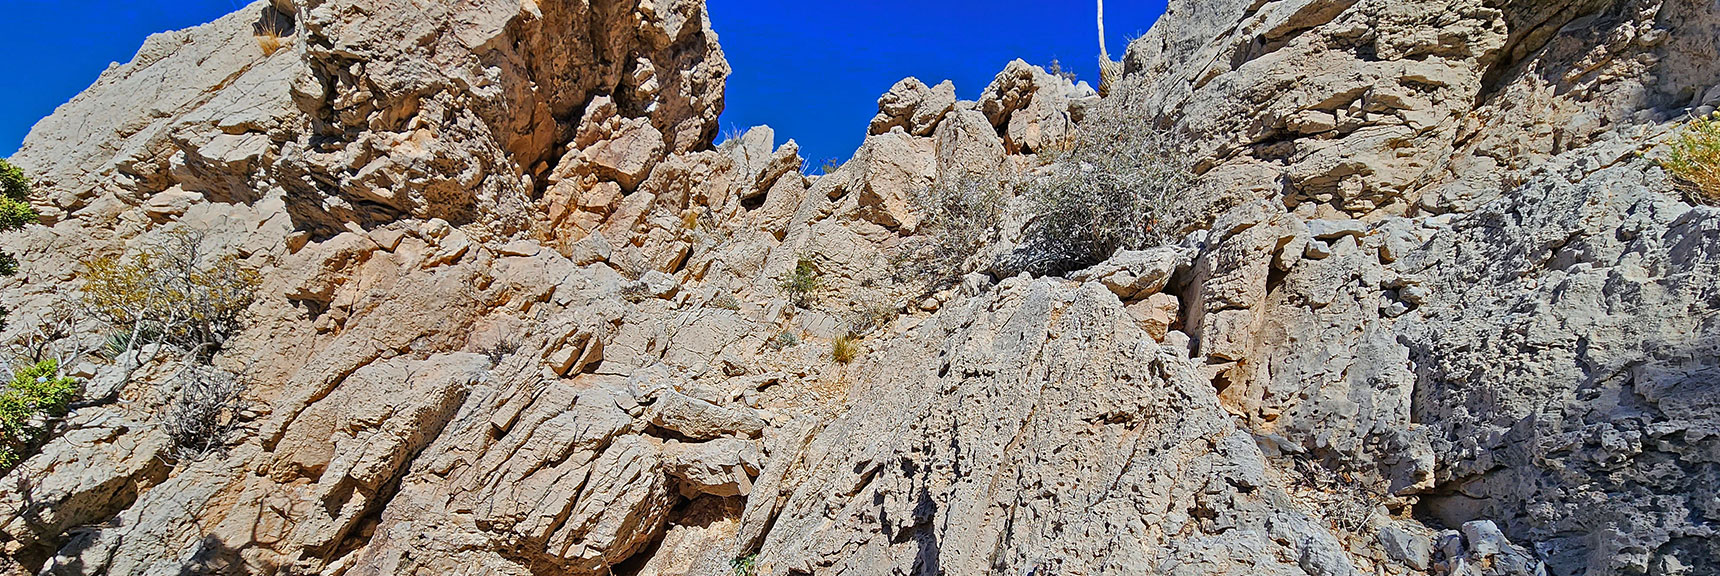 One Fairly Tame Class 3 Ascent Through Opening to Ridgeline Center | Turtlehead Peak | Red Rock Canyon National Conservation Area, Nevada